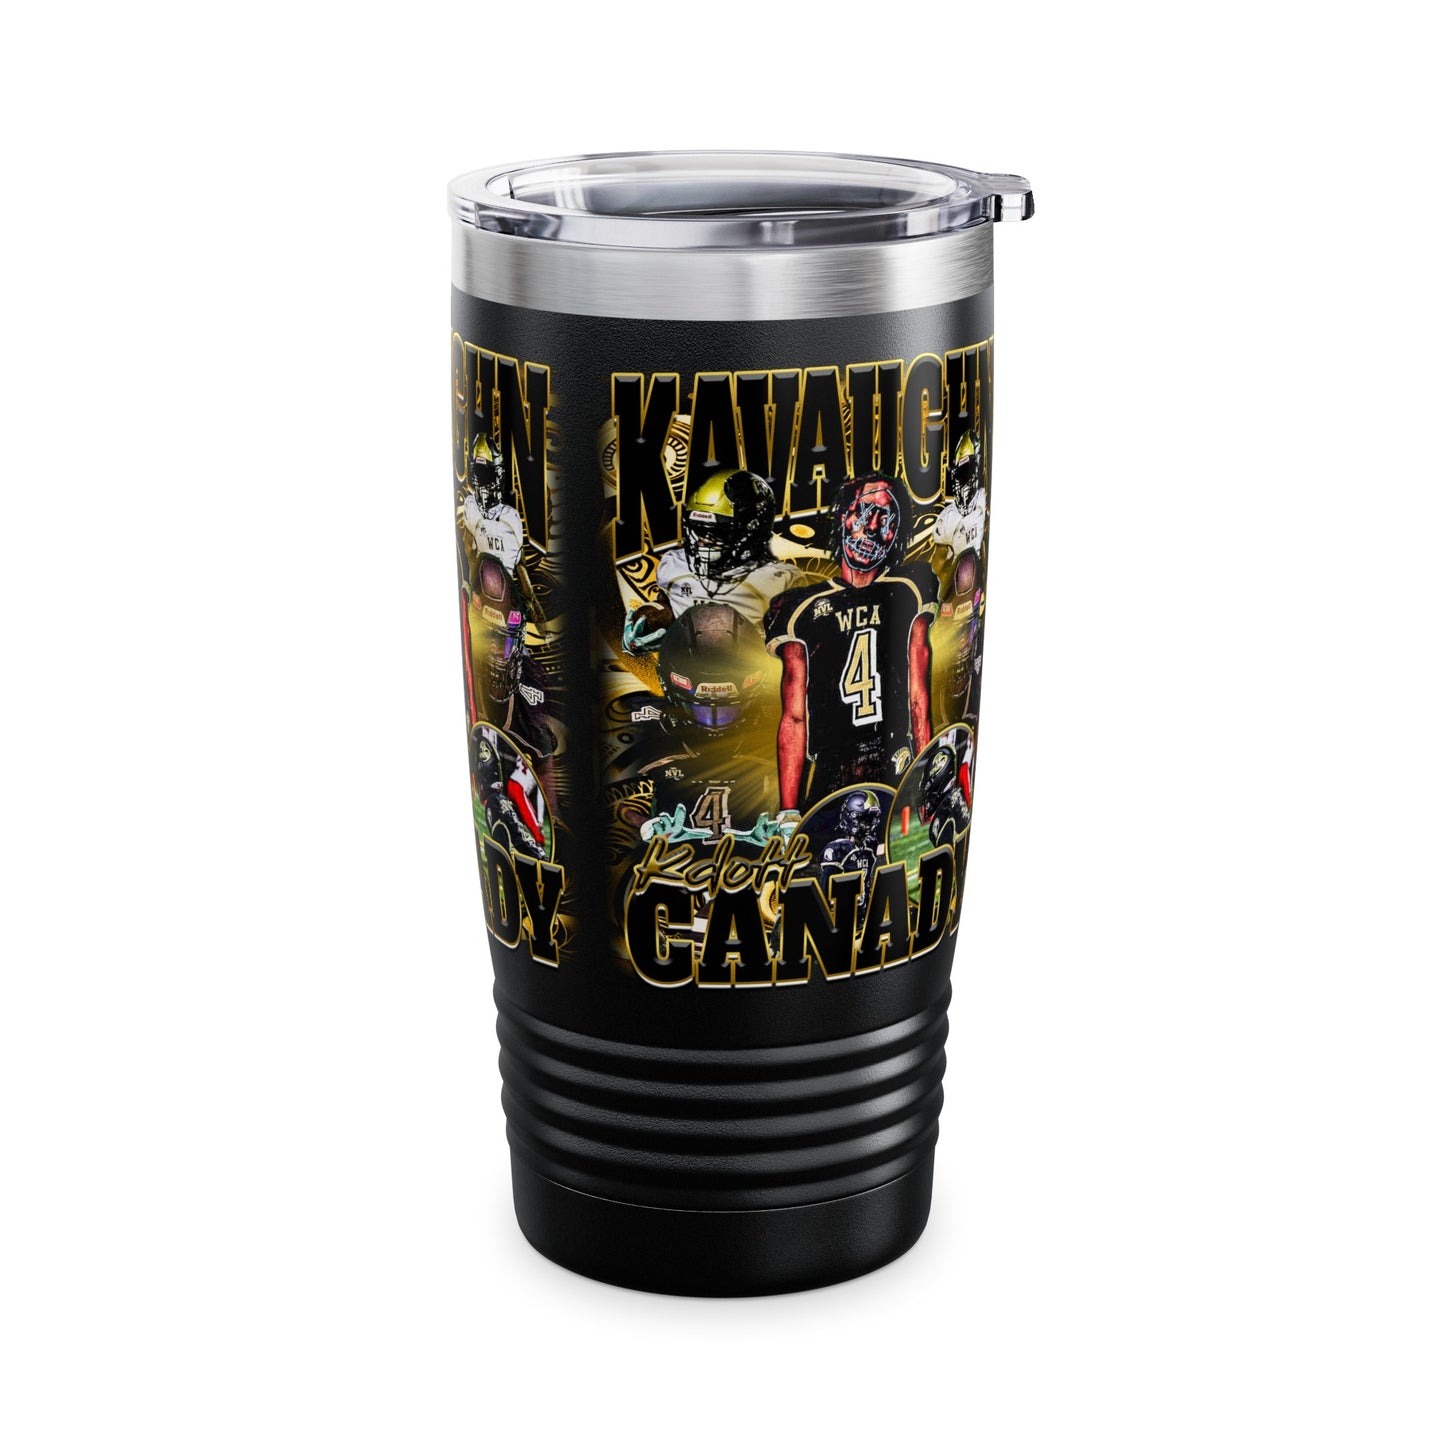 Kavaughn Canady Stainless Steal Tumbler